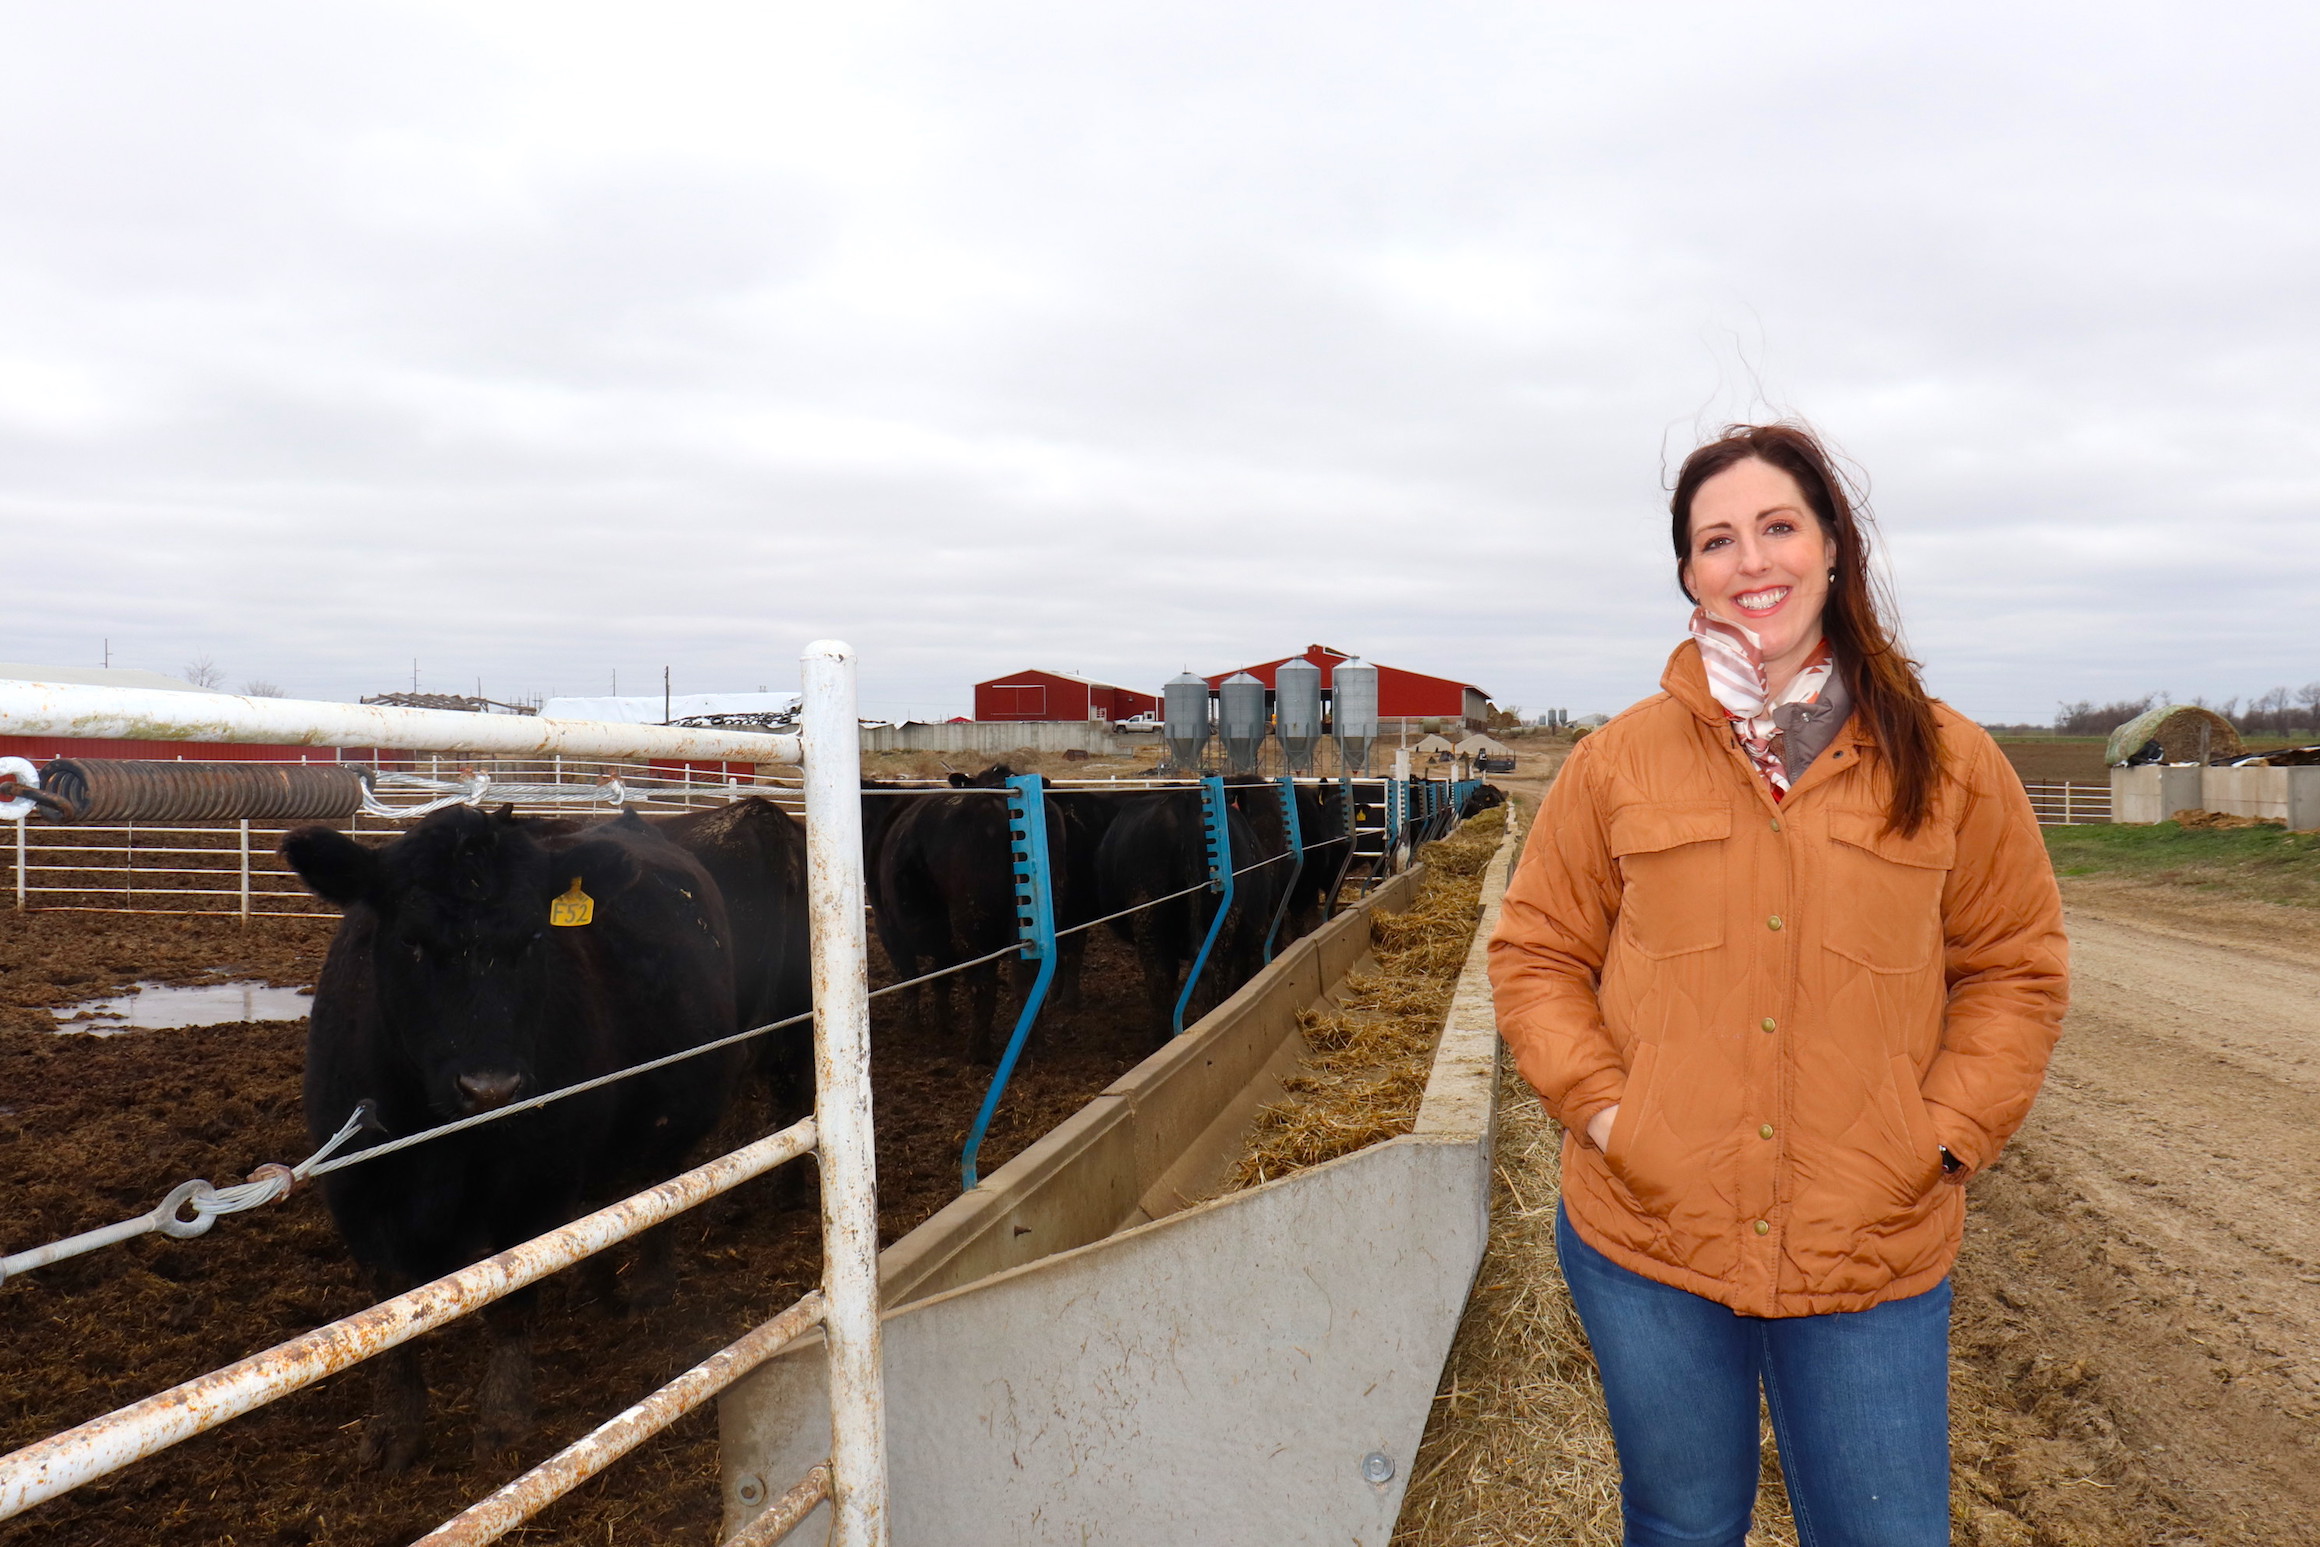 Open Marion County farmer Amy Meyer Lehenbauer learned from Annie’s Project, a program offered by University of Missouri Extension. A 20th-anniversary celebration of Annie’s Project will be held April 1 at Lee Greenley Jr. Memorial Research Farm in Novelty. Ph